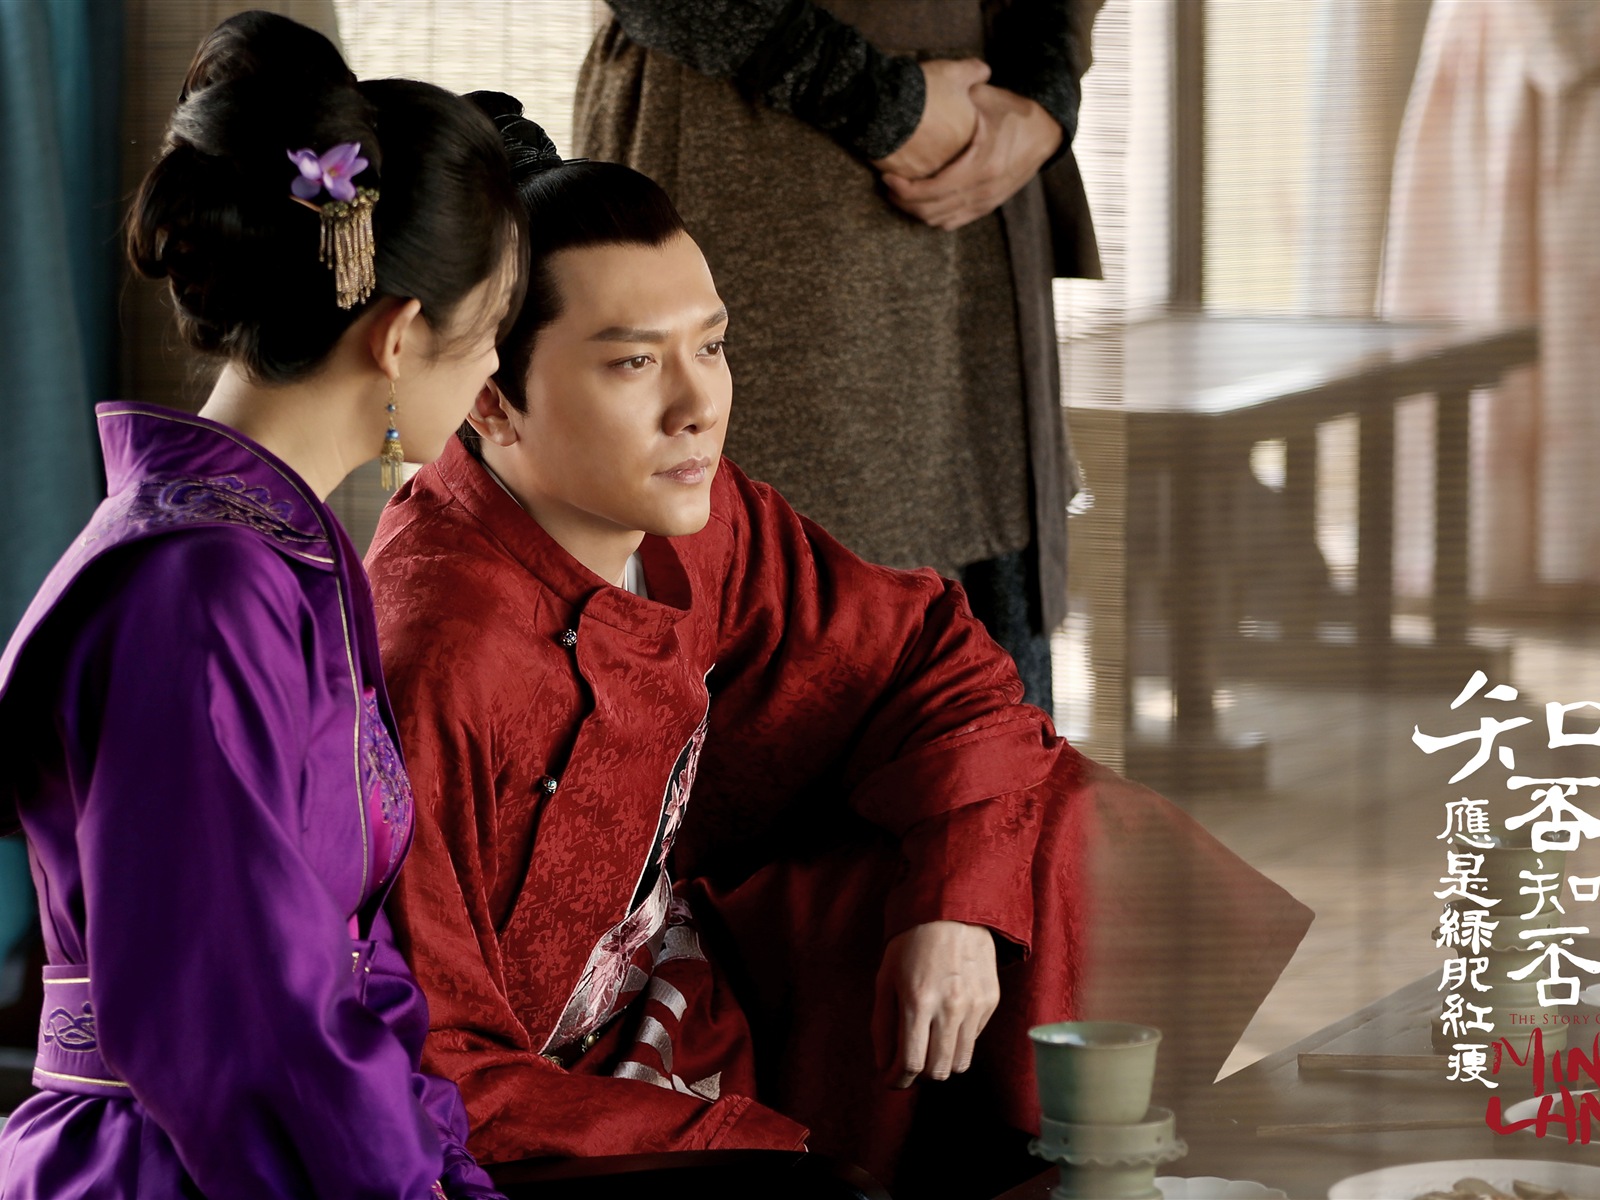 The Story Of MingLan, TV series HD wallpapers #42 - 1600x1200